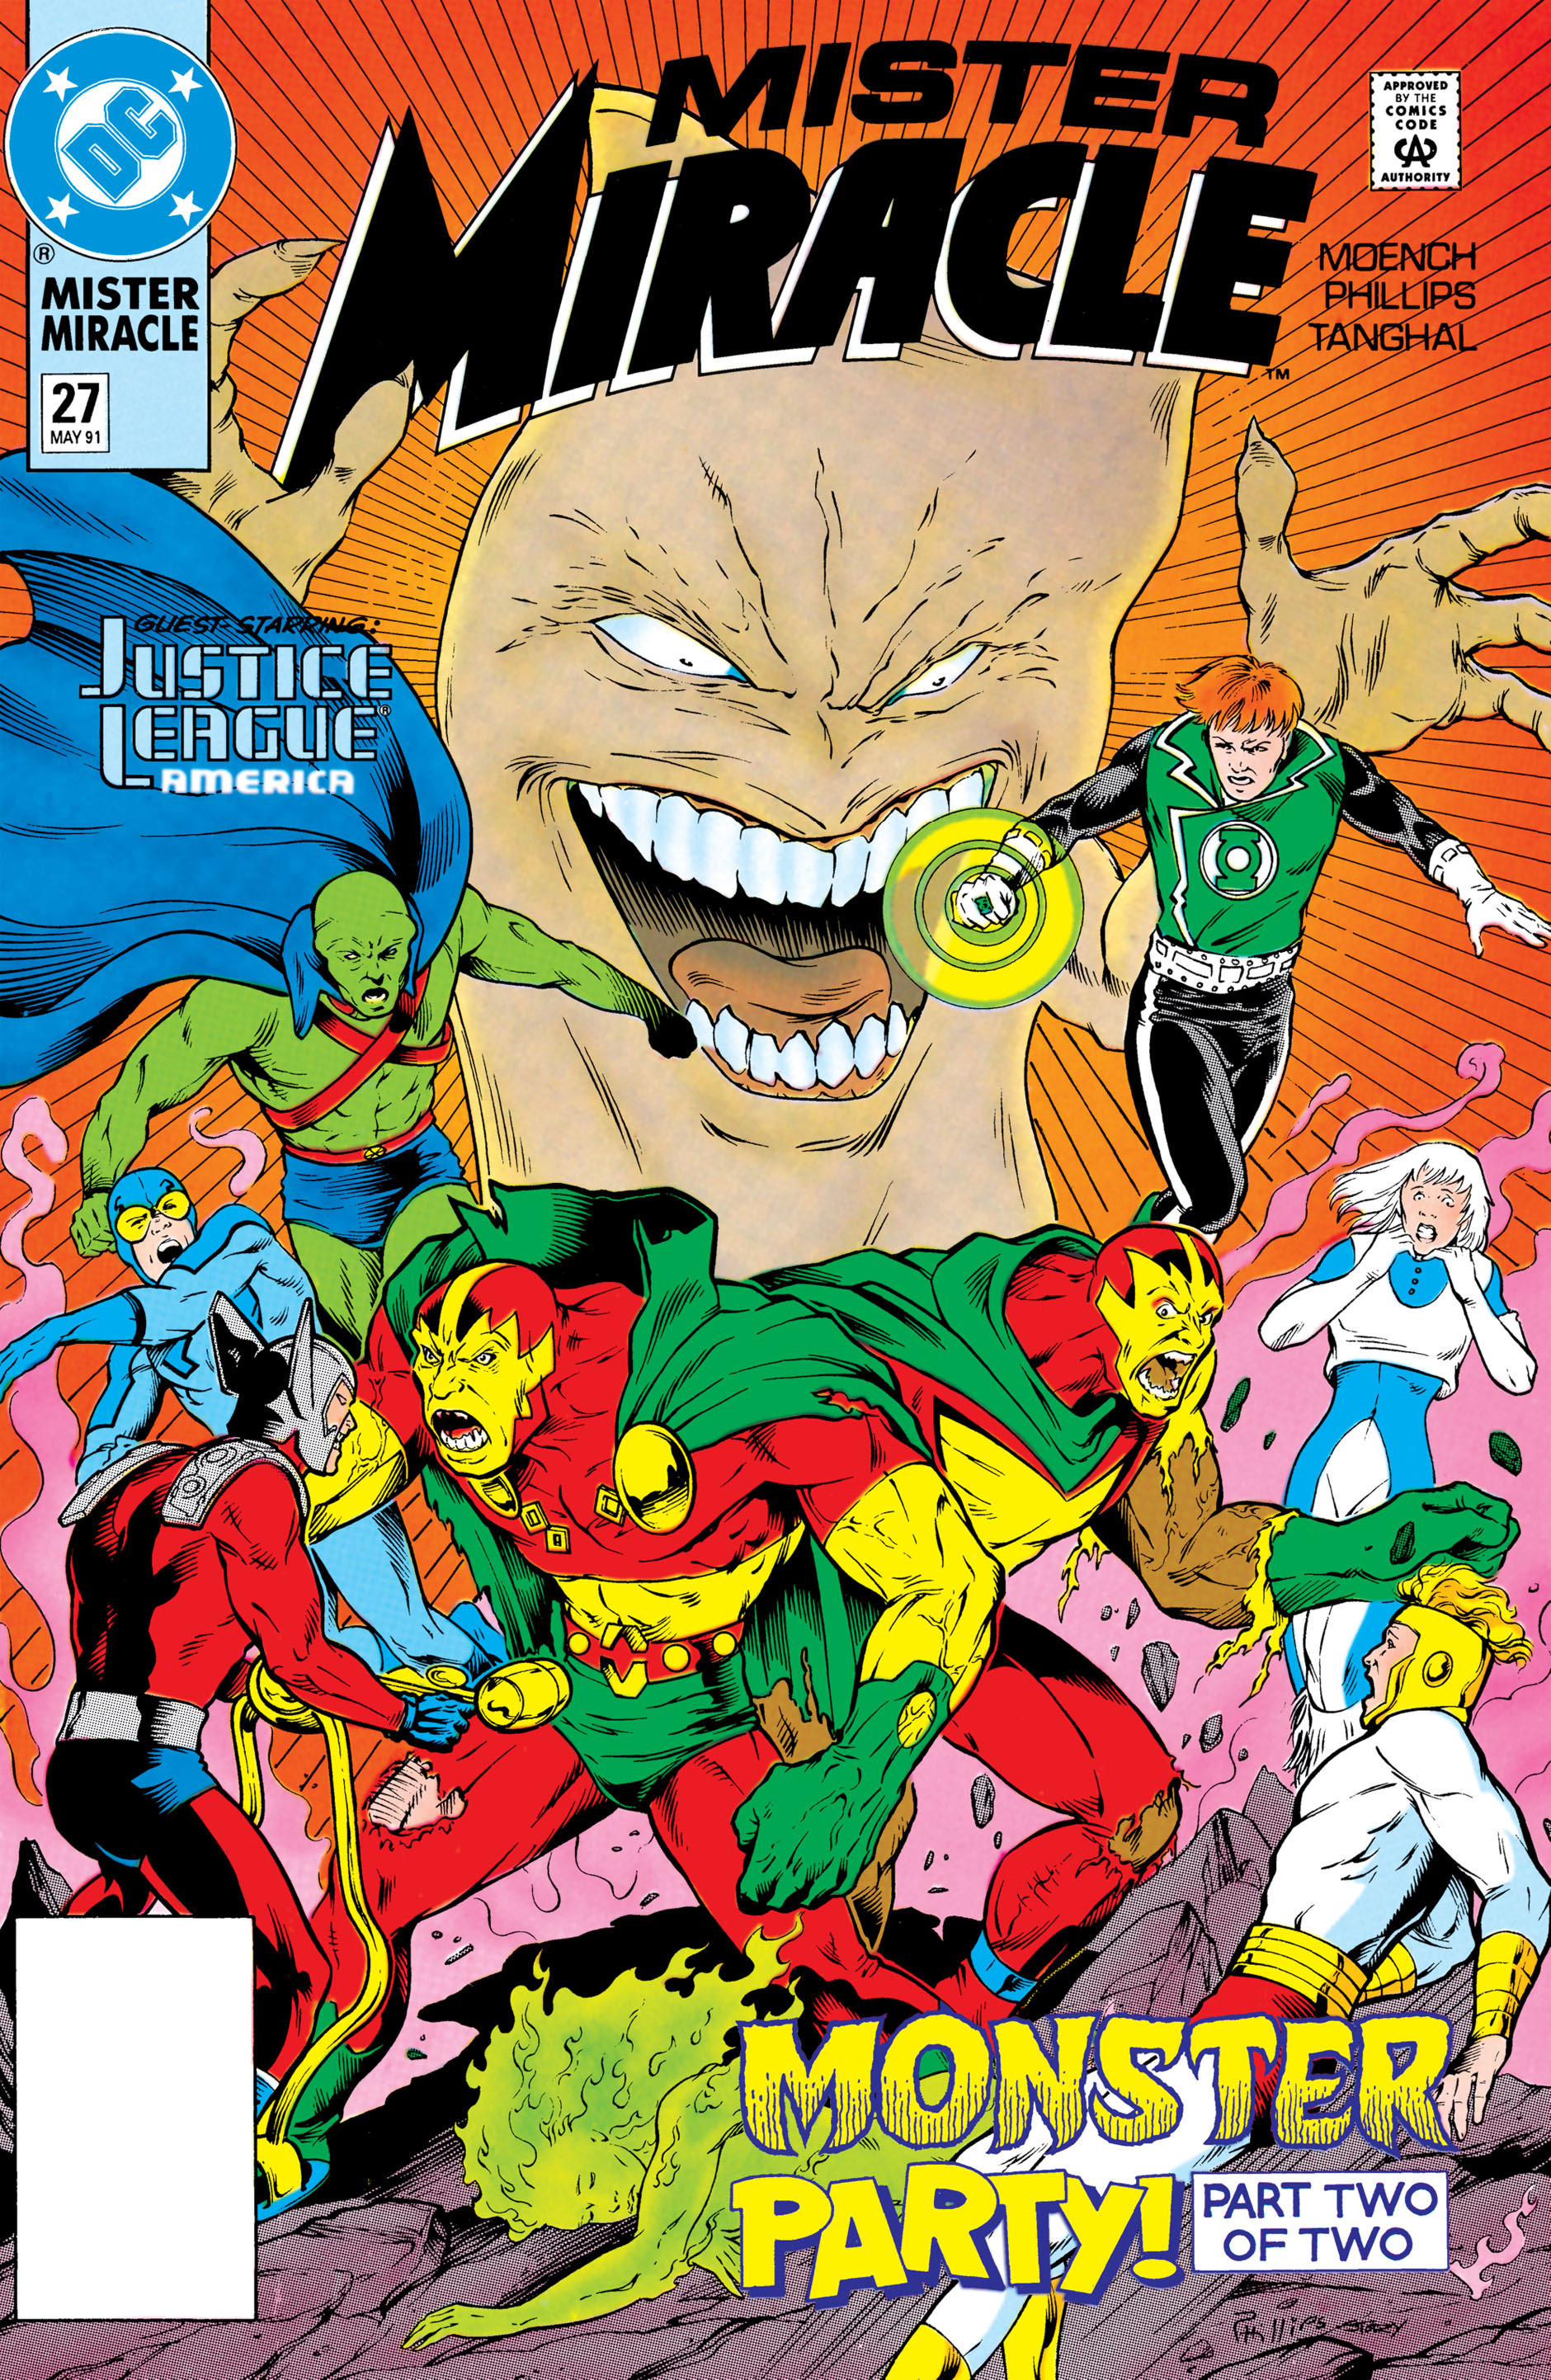 Read online Mister Miracle (1989) comic -  Issue #27 - 1